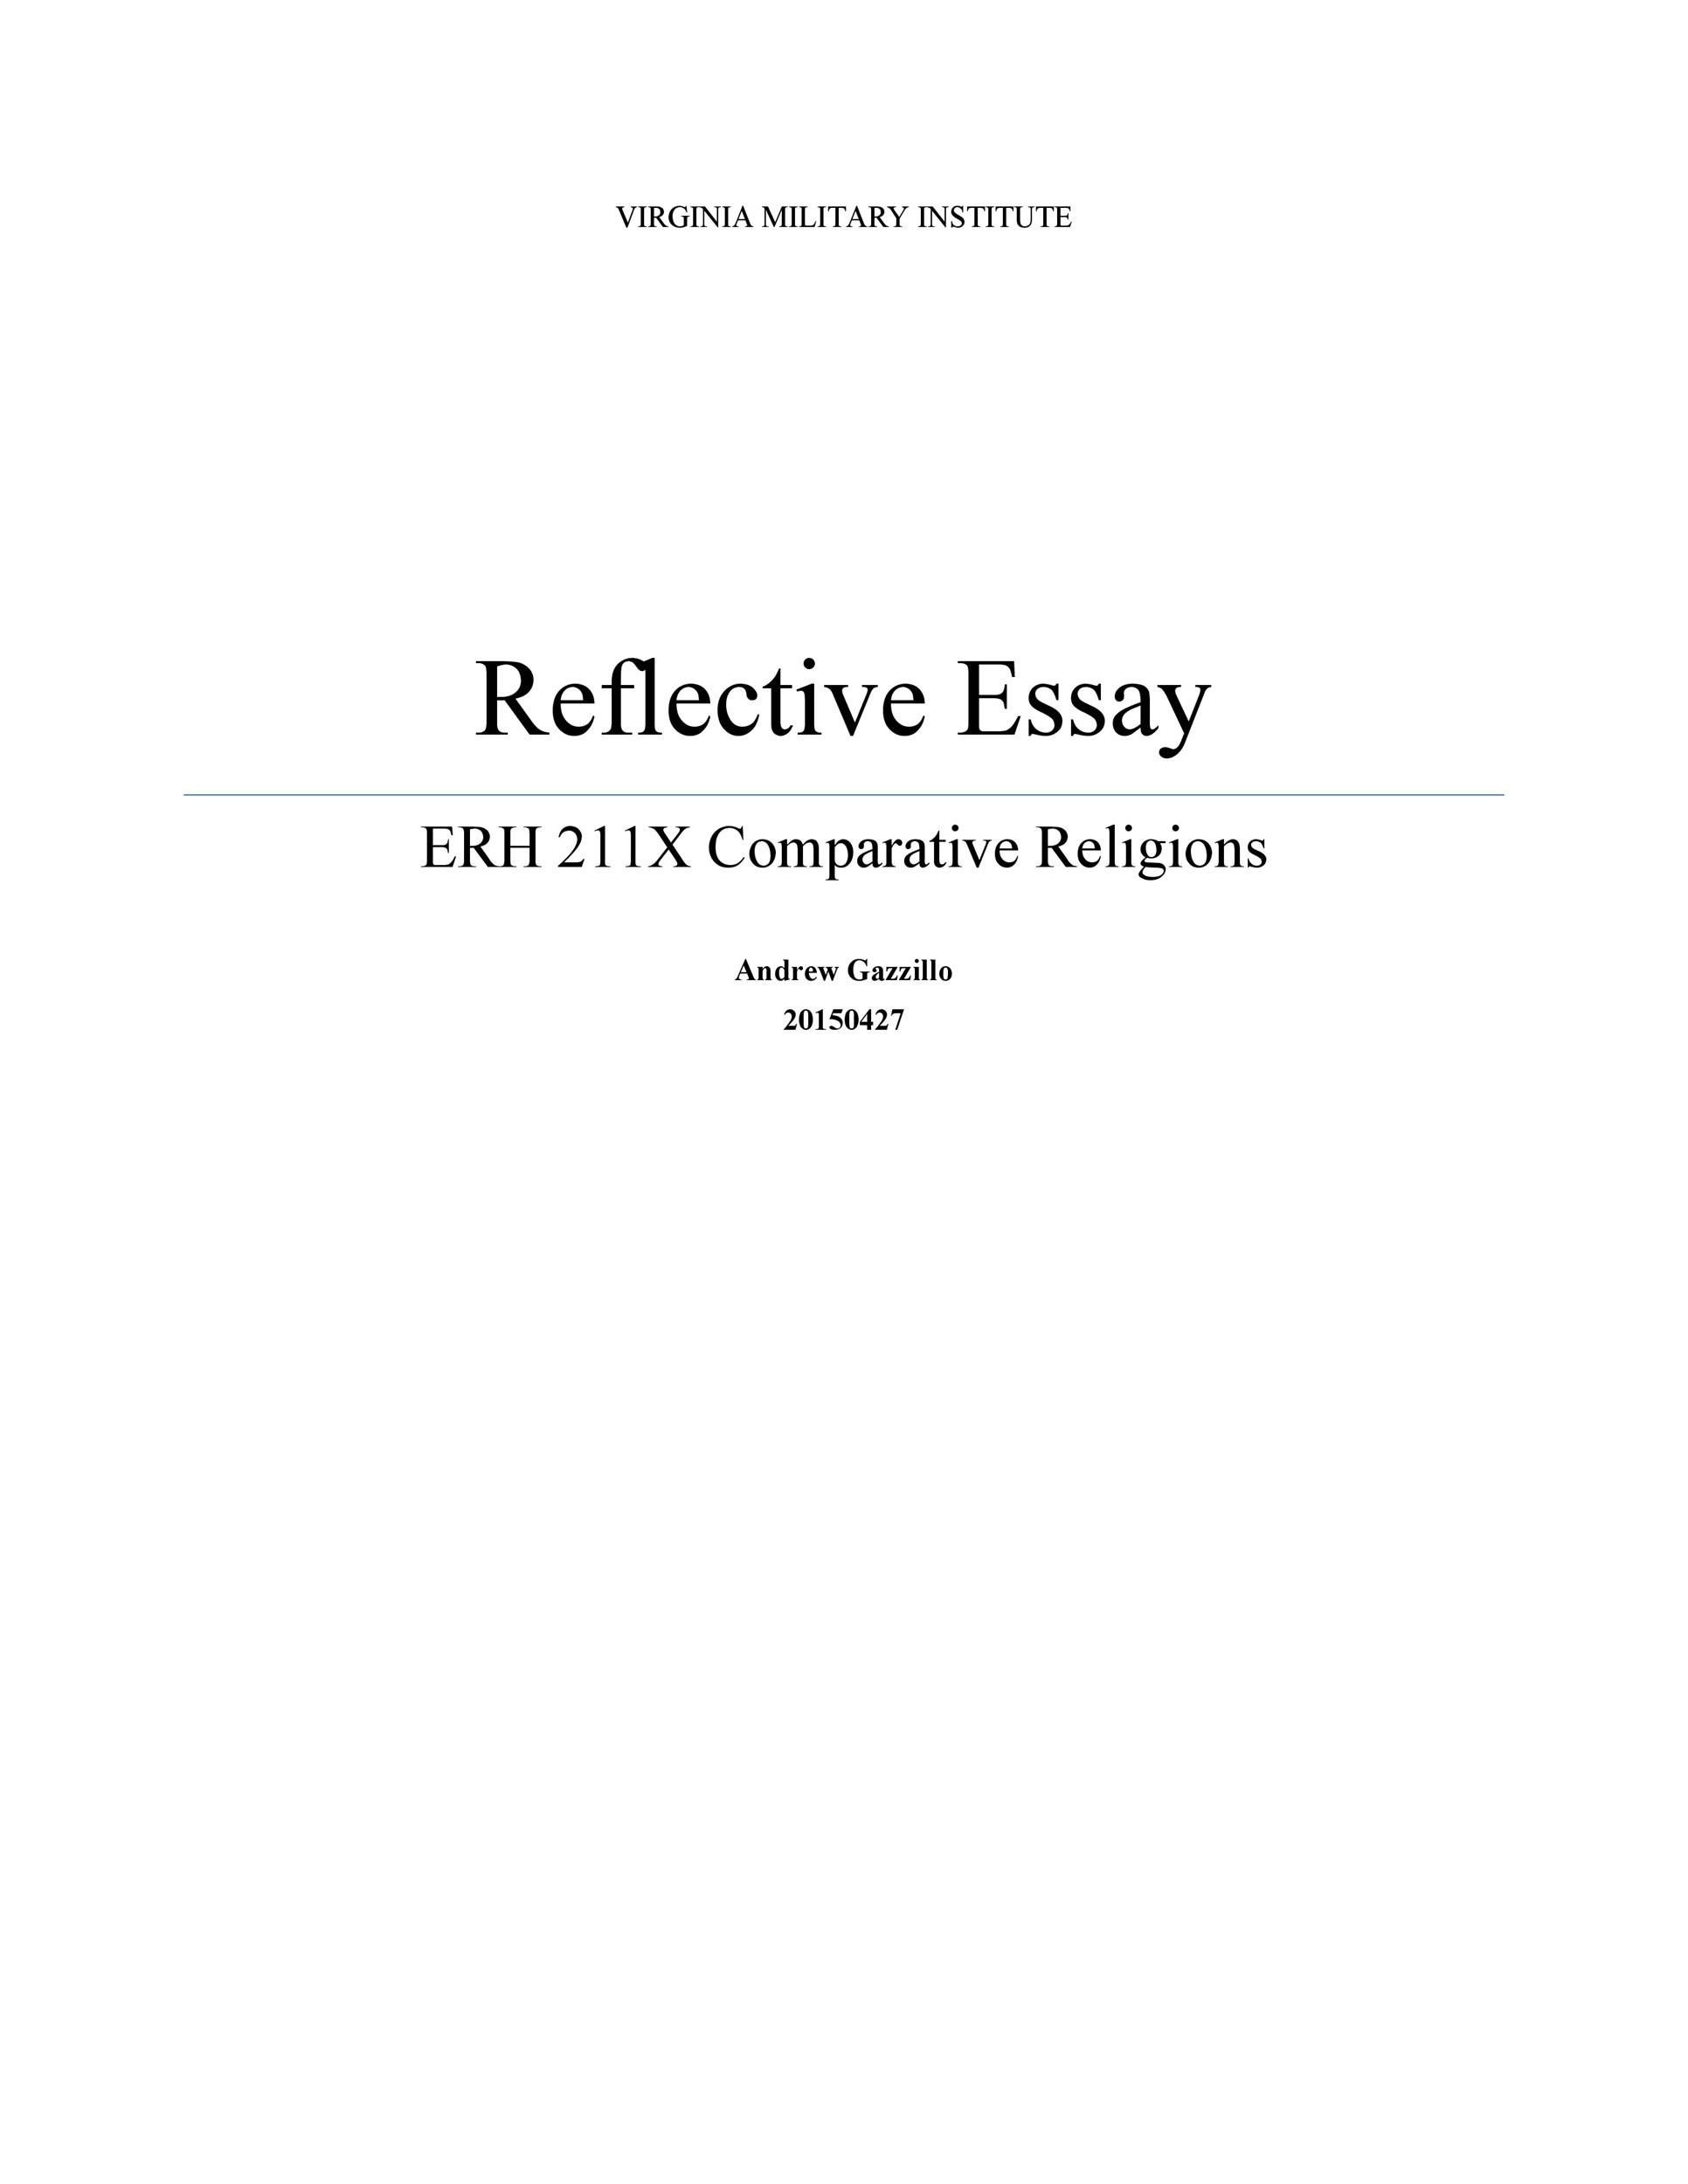 reflection paper template